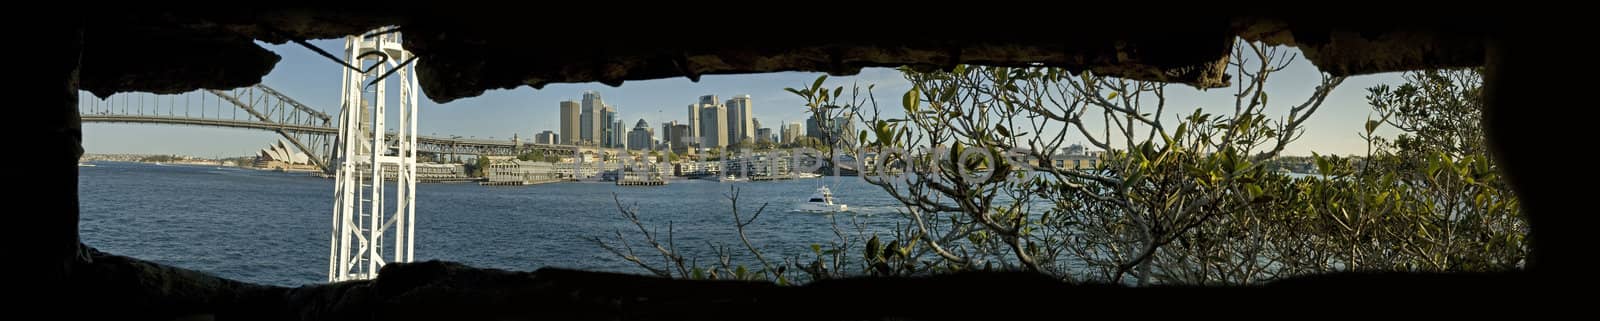 sydney city viewed from an old military bunker, opera house, cbd and harbour bridge